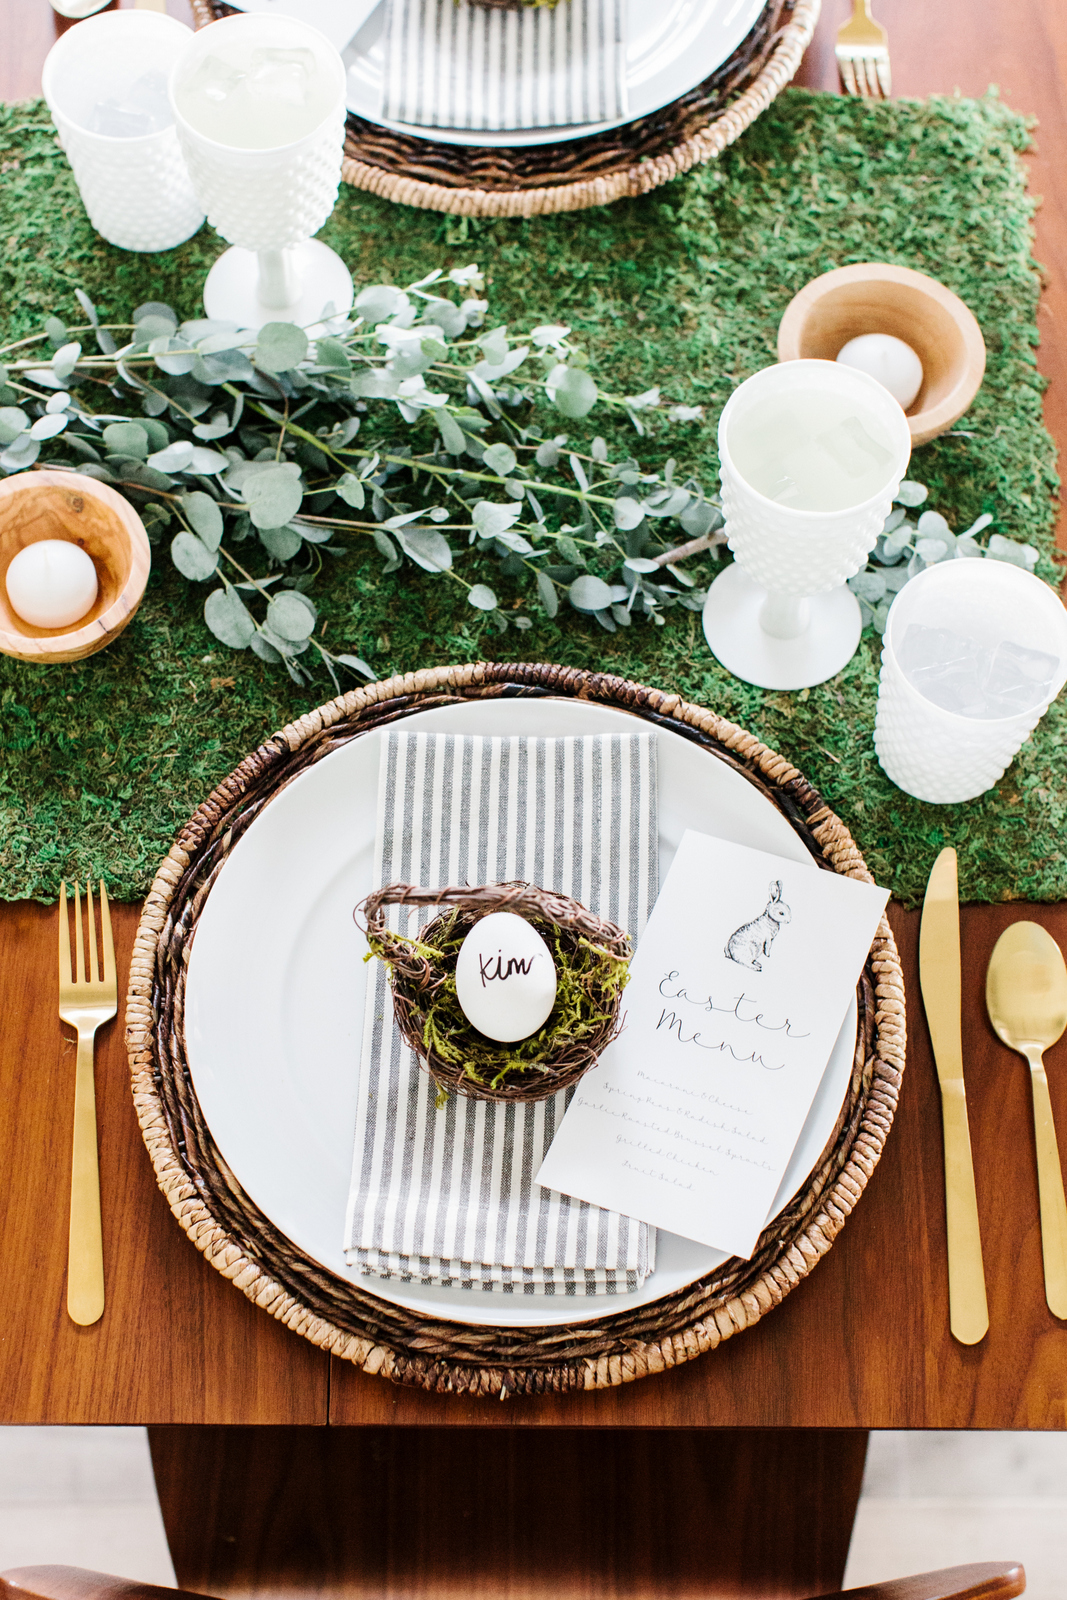 Simply Beautiful Easter Lunch styled by The TomKat Studio